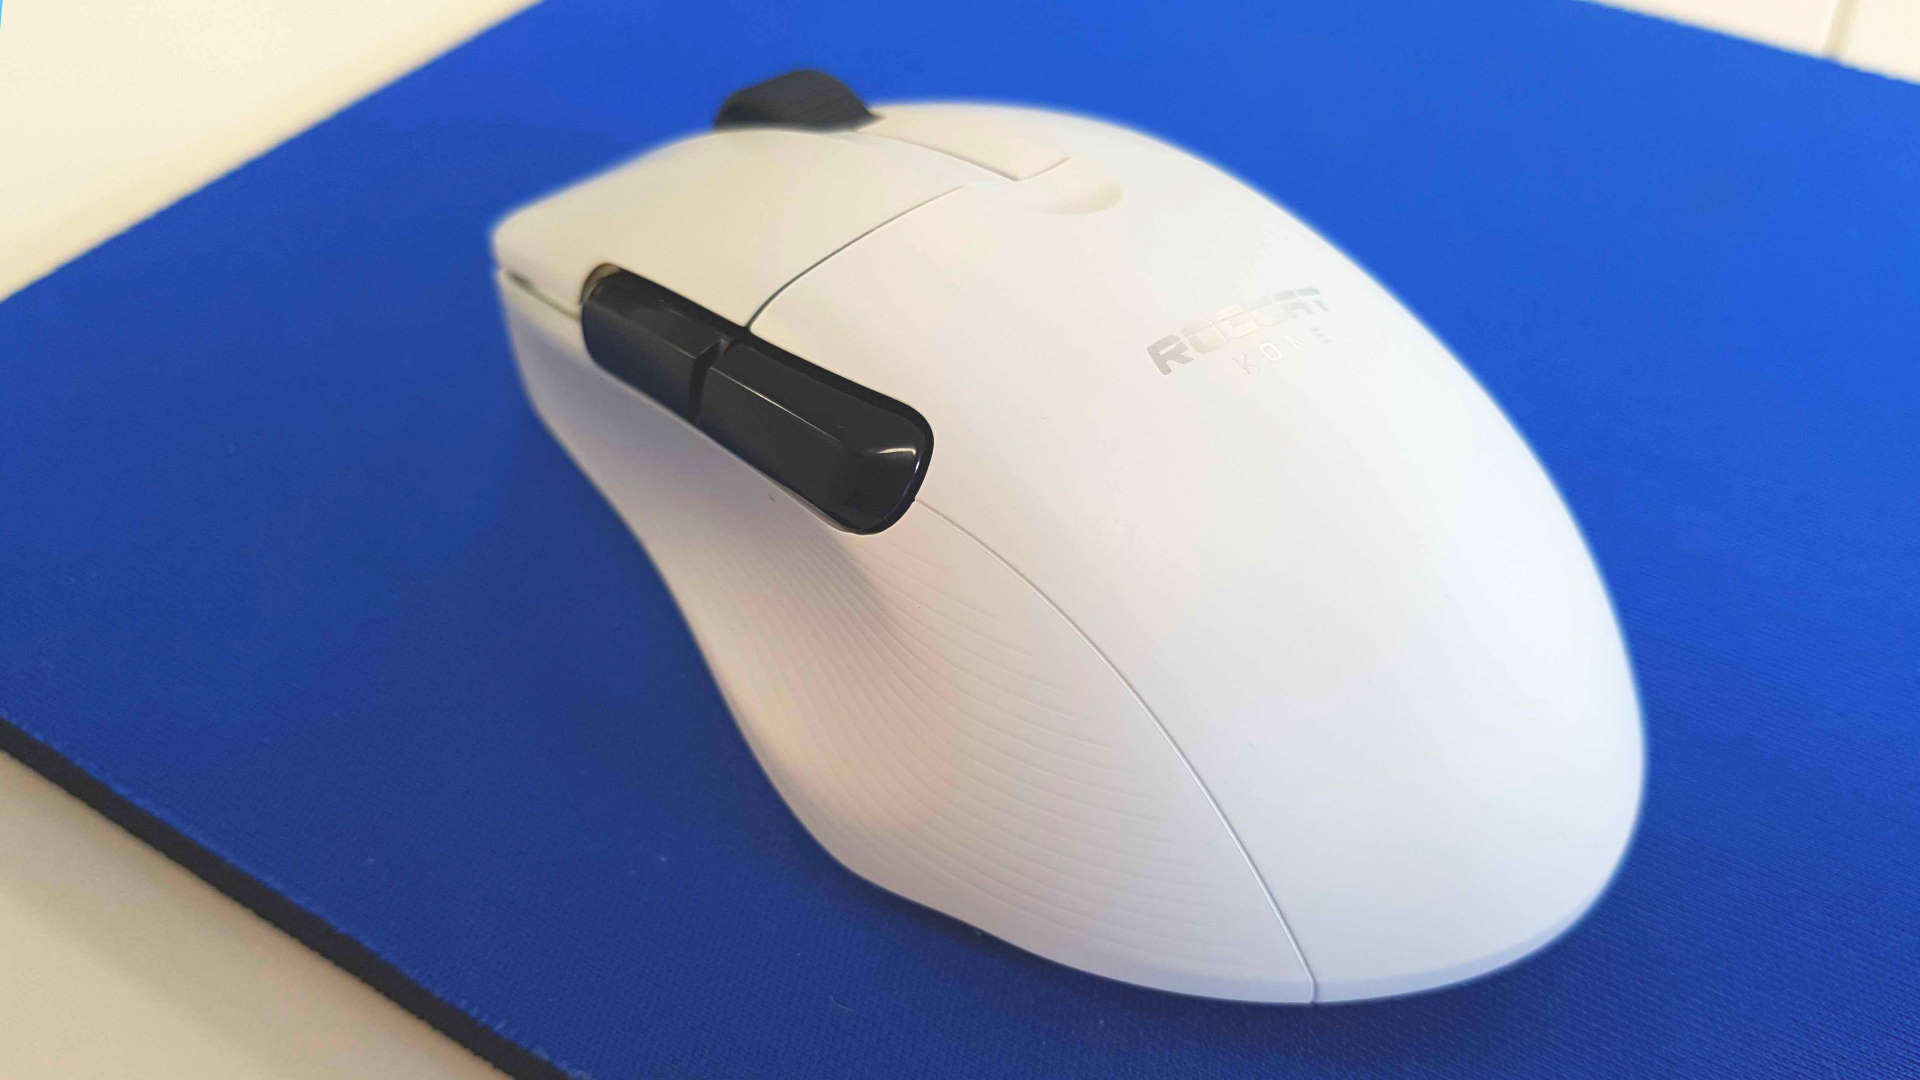 The Roccat Kone Pro Air wireless gaming mouse